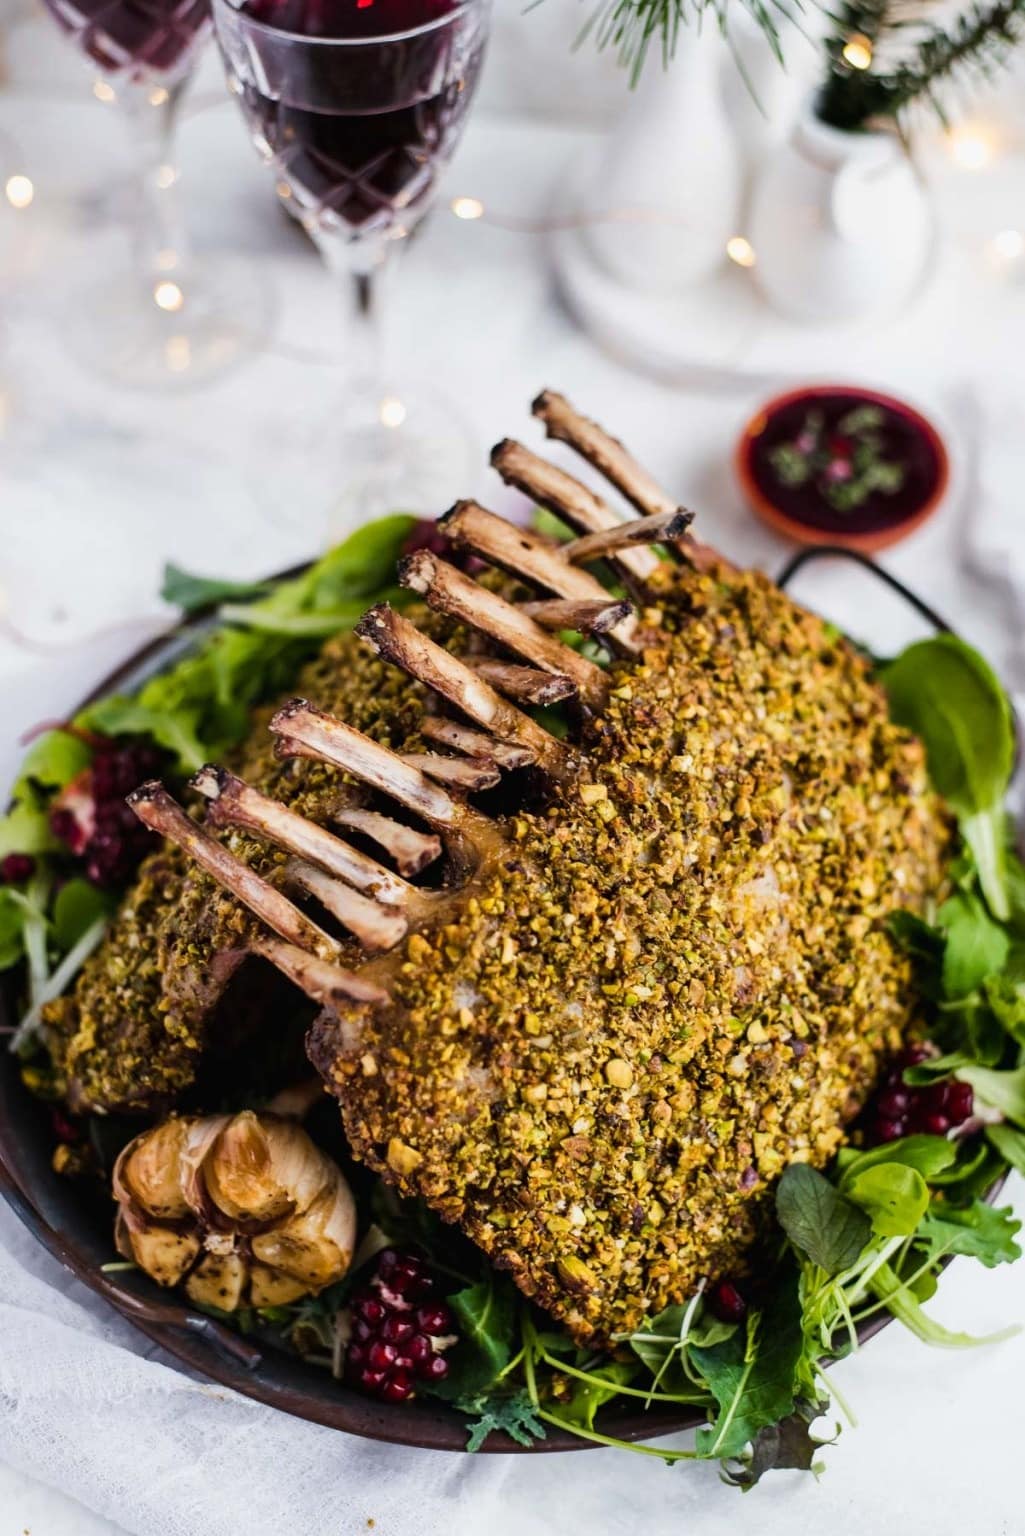 Lamb crusted with pistachio and pesto served on top of arugula salad. 